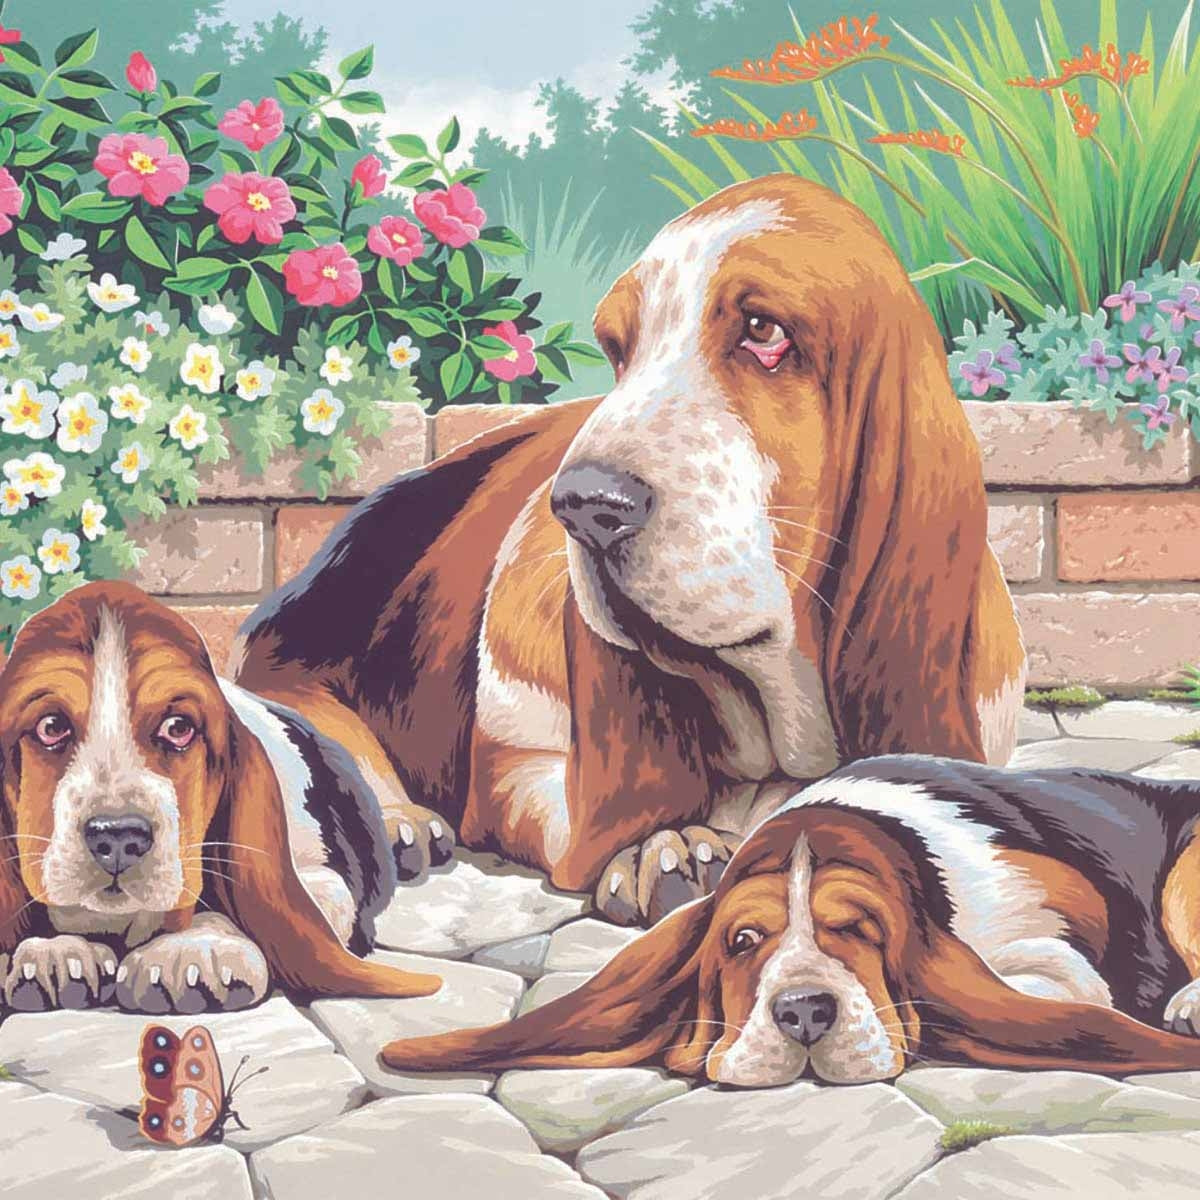 KSG - Large Painting By Numbers - Basset Hounds